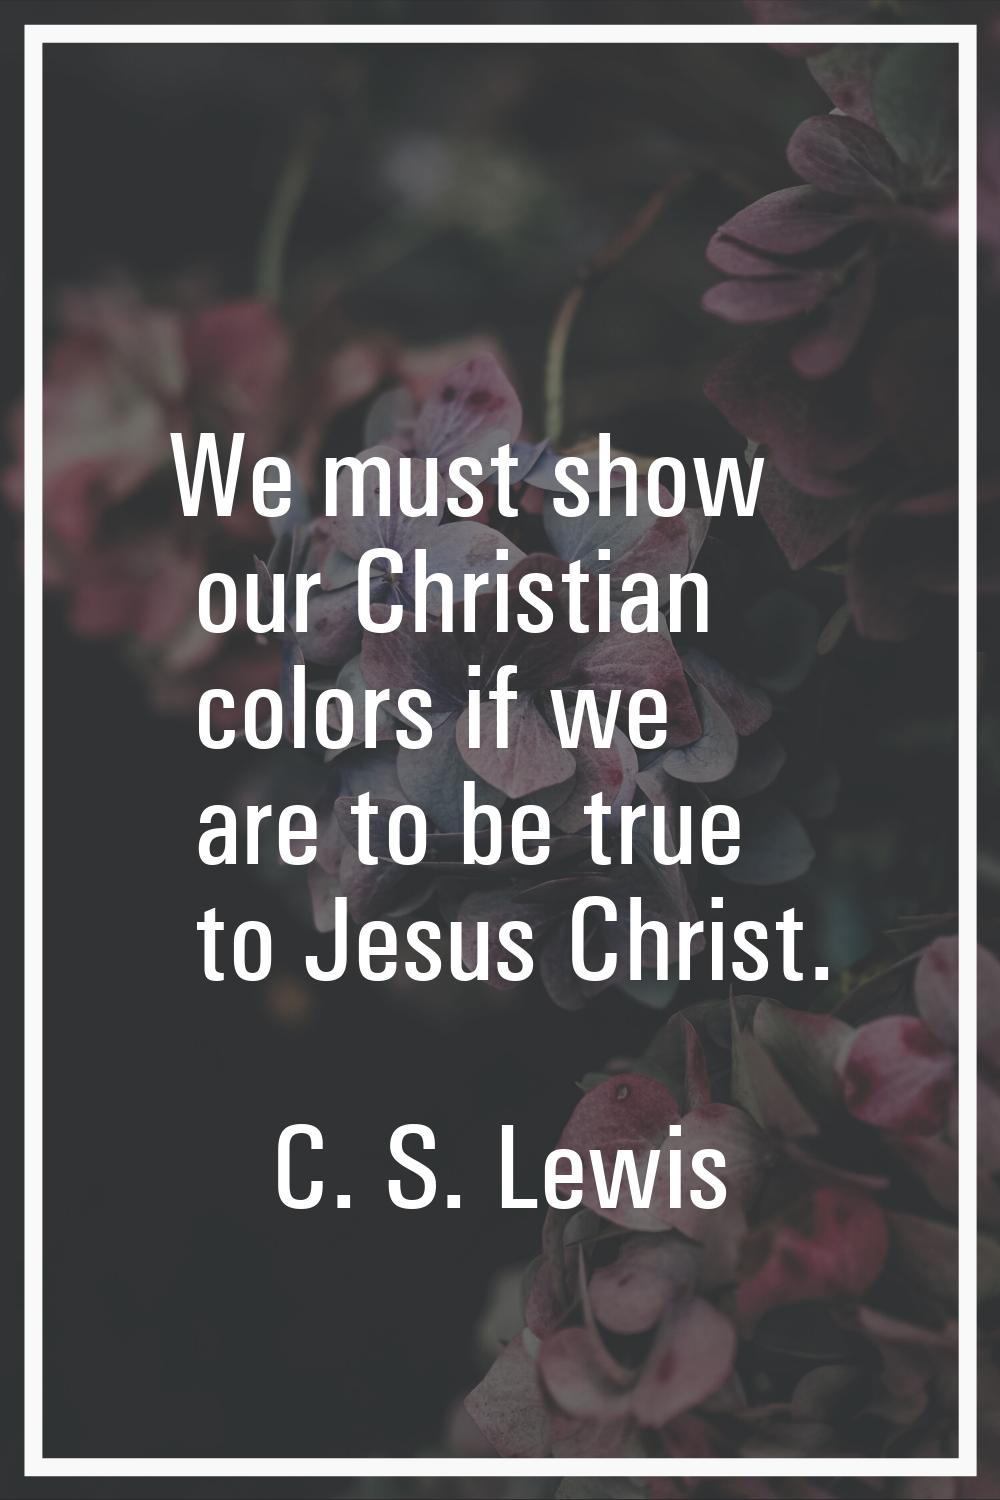 We must show our Christian colors if we are to be true to Jesus Christ.